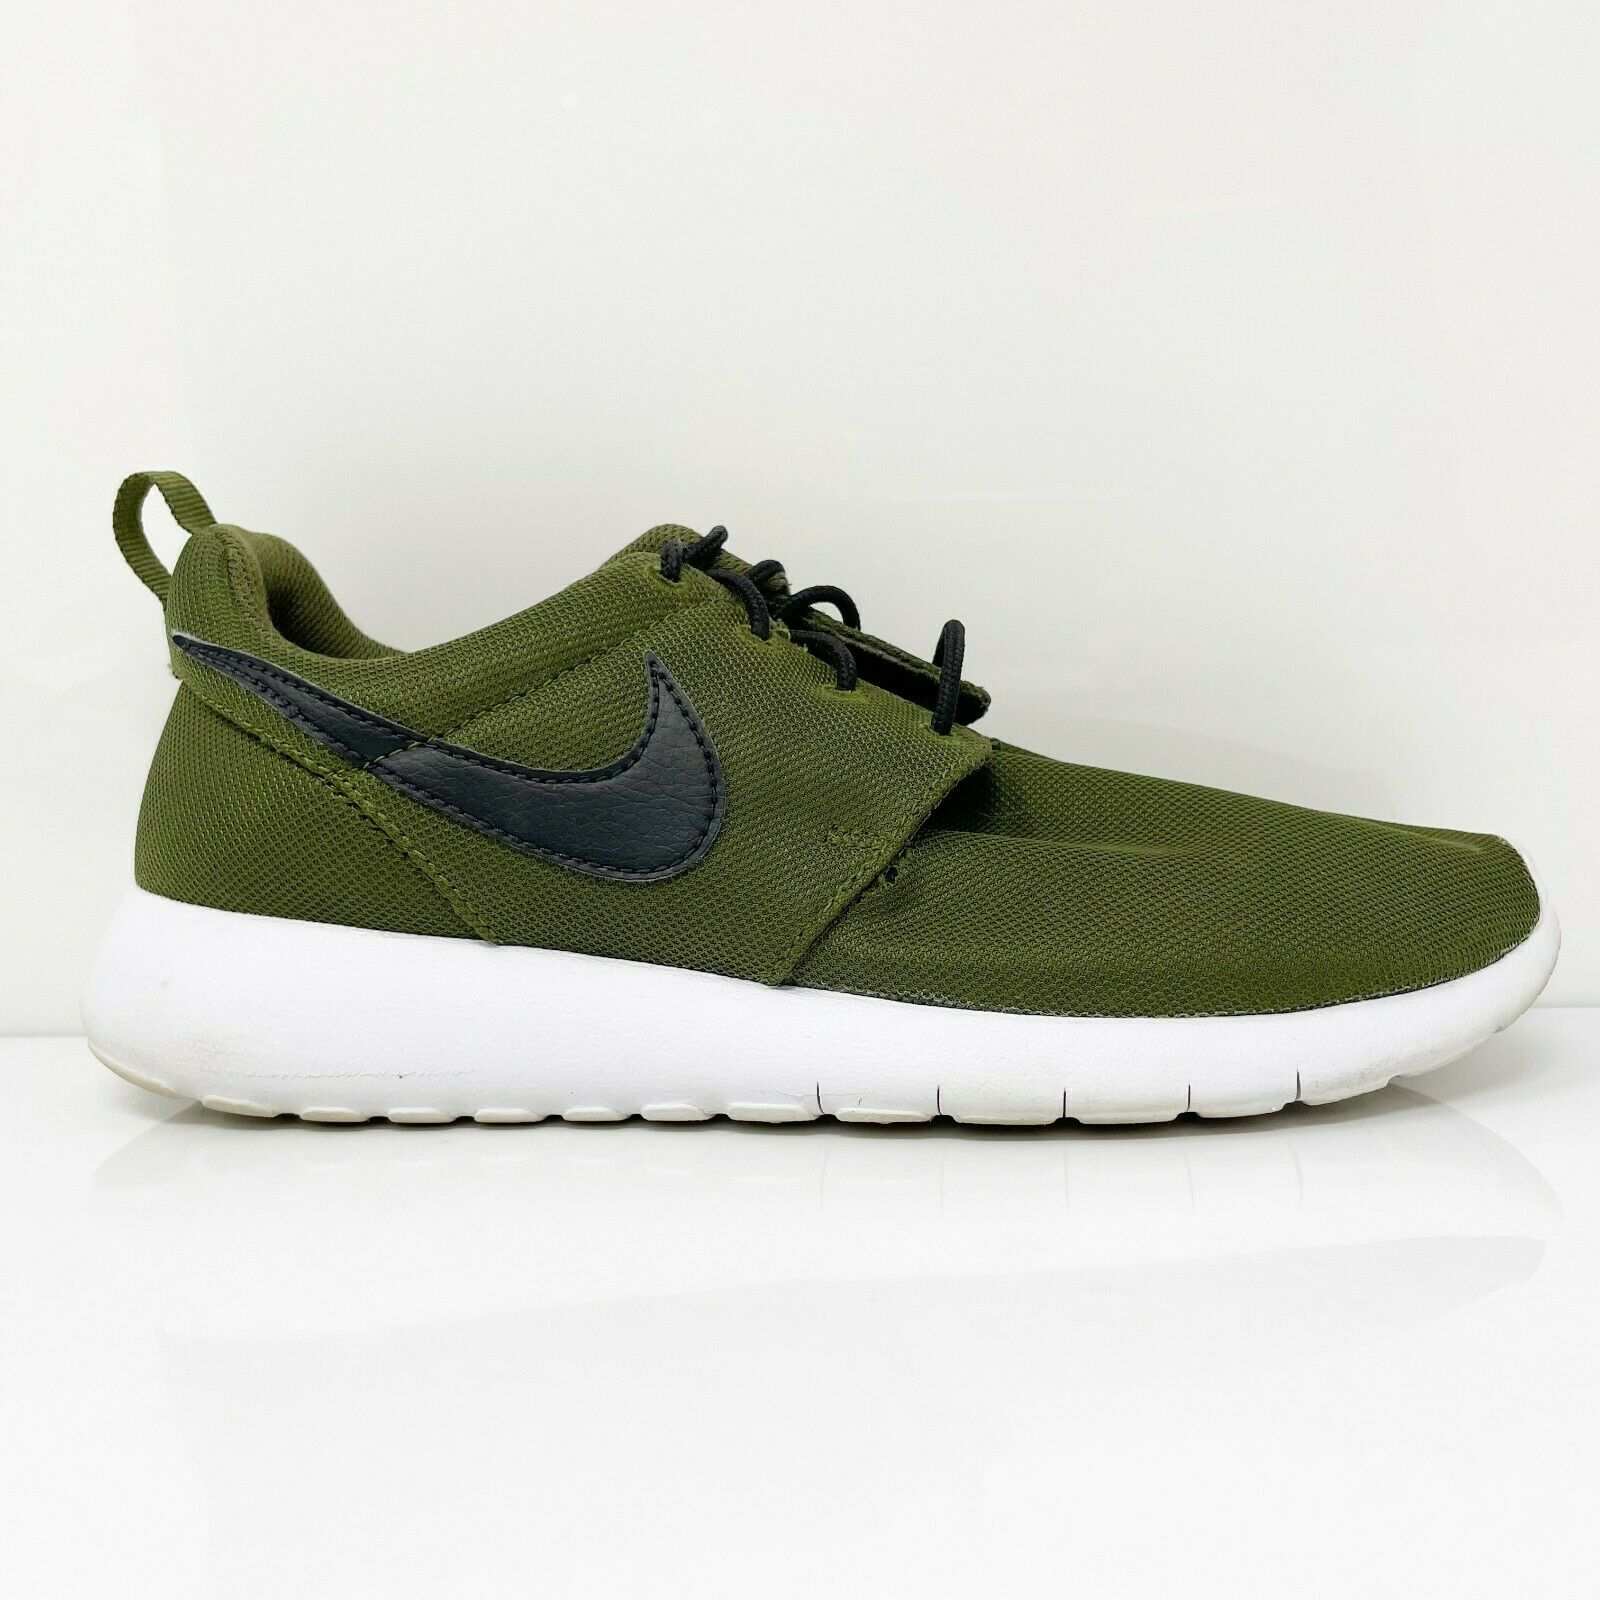 Nike Boys Roshe One 599728-303 Green Running Shoes Sneakers Size 7Y